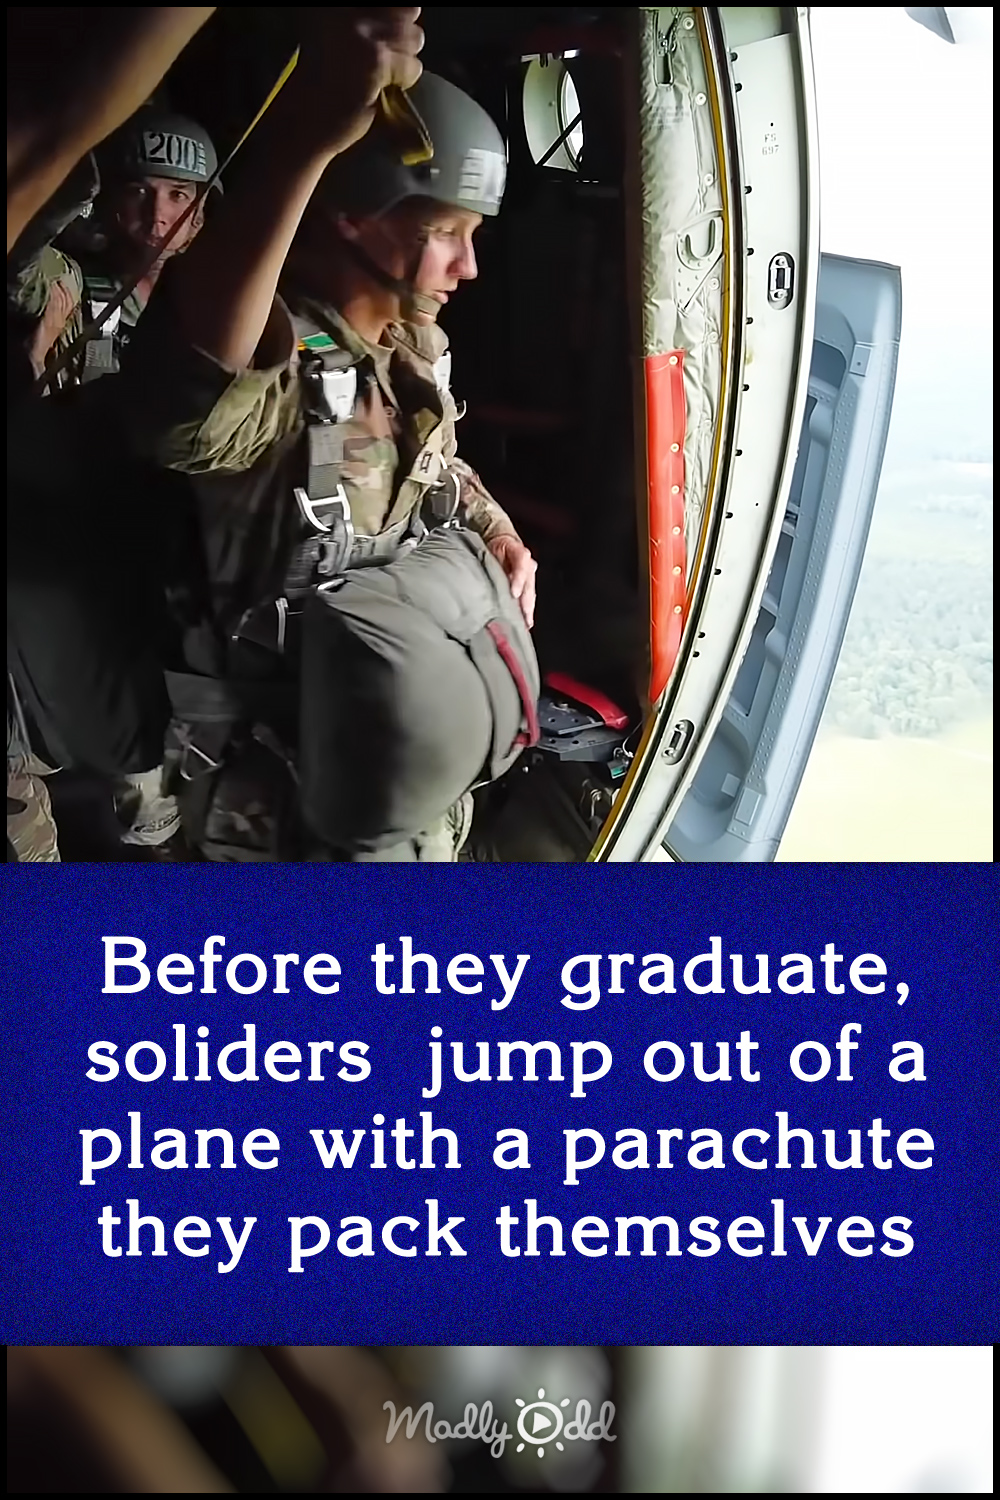 Before they graduate, soldiers jump out of a plane with a parachute they pack themselves